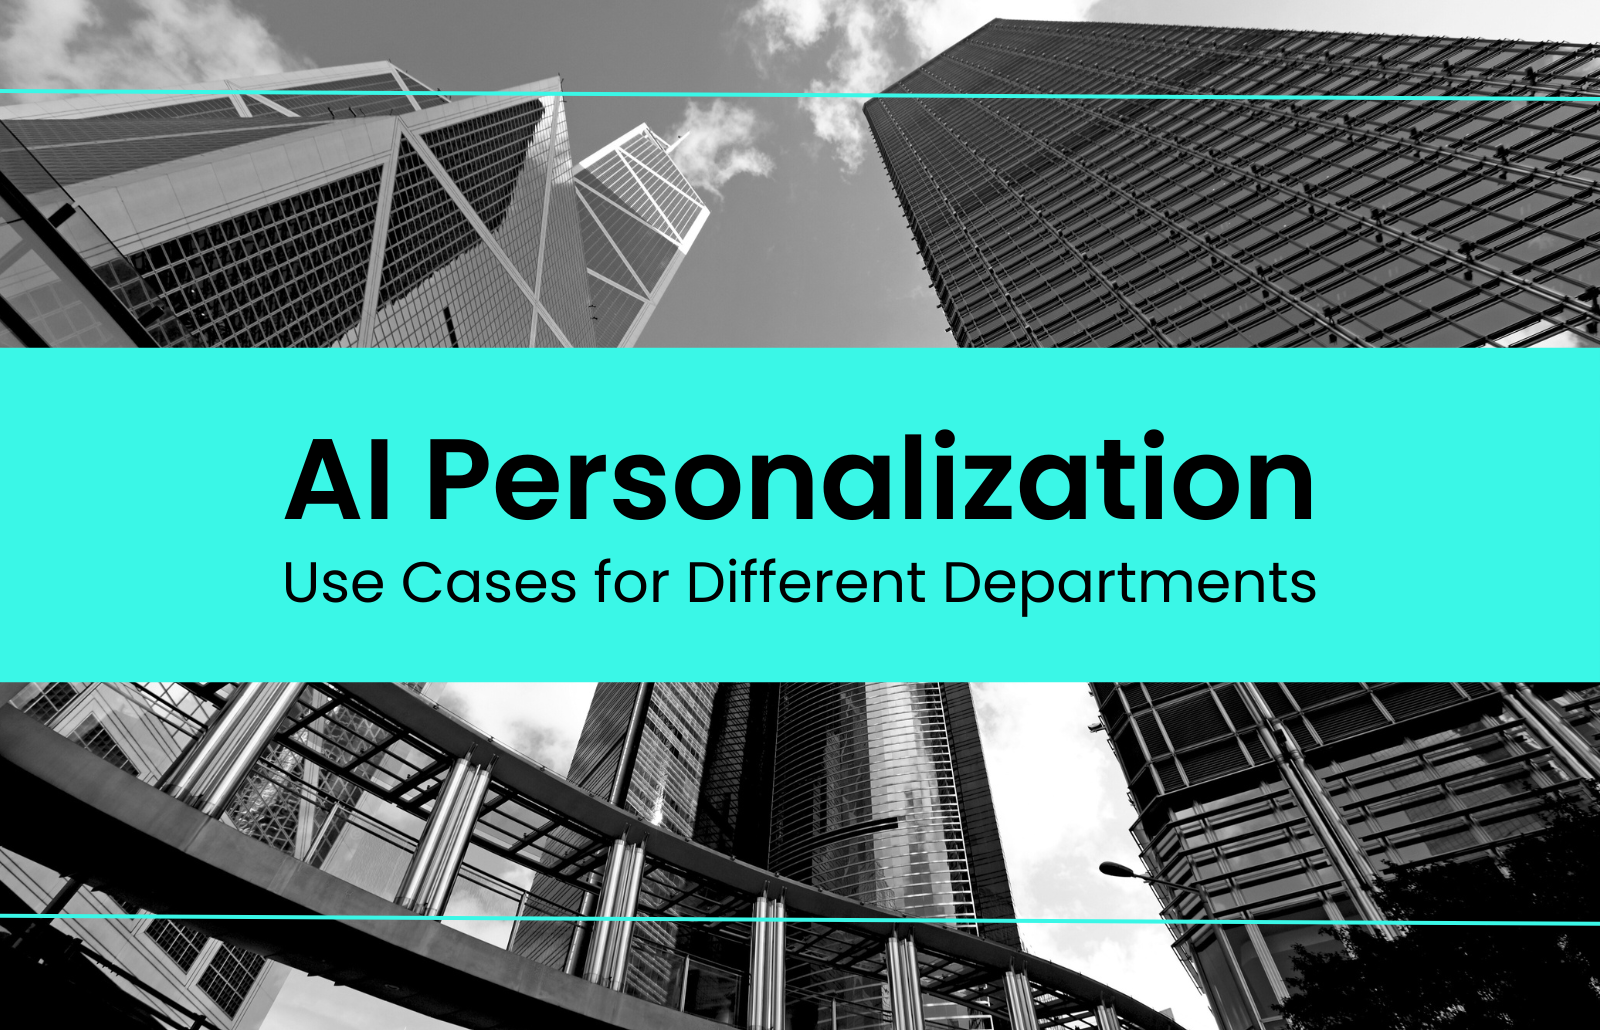 AI Personalization - Use Cases for Different Departments